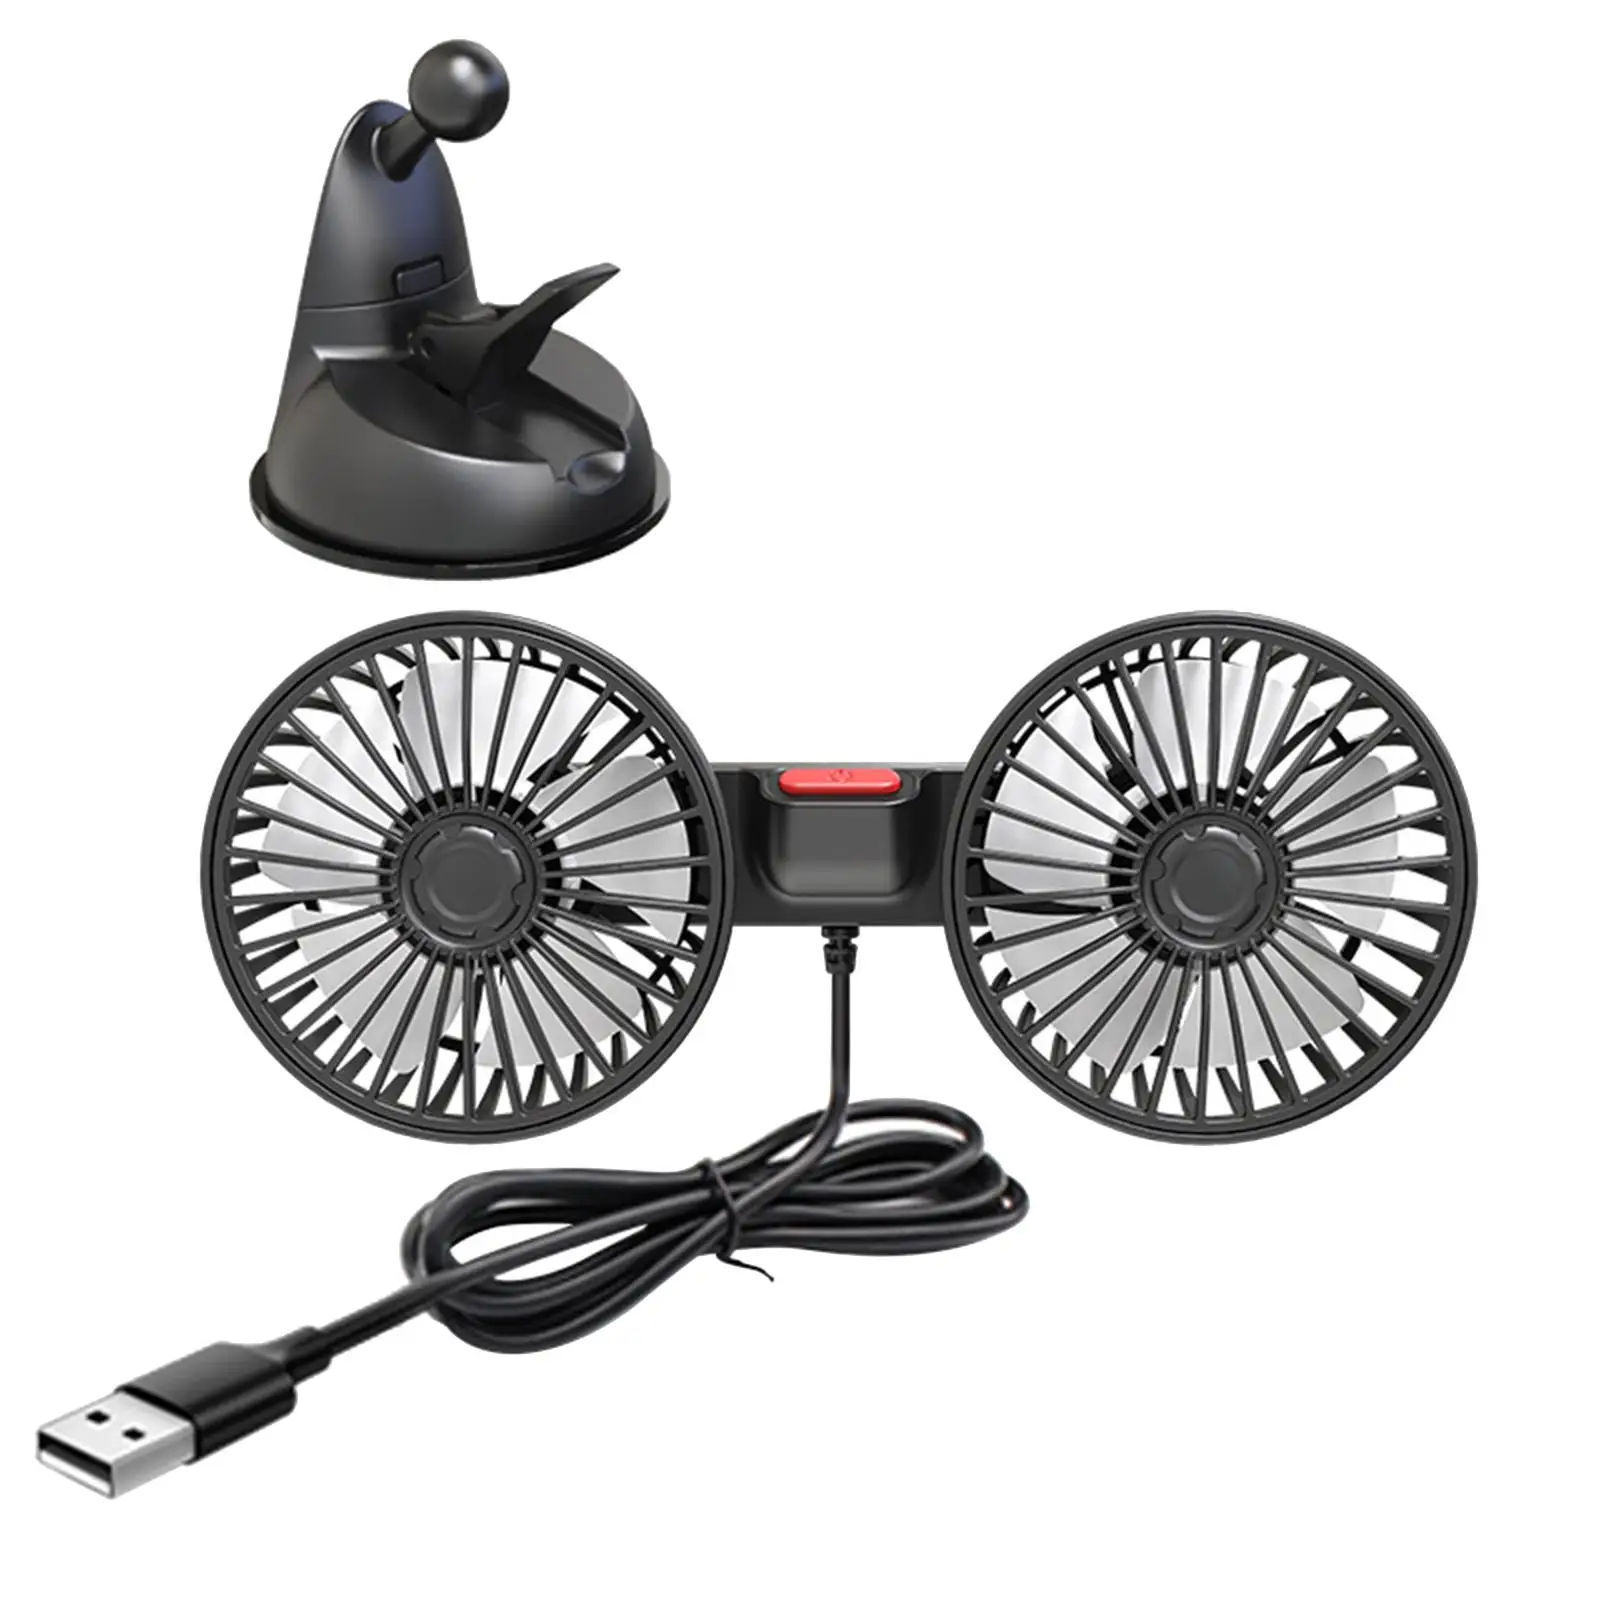 Auto Cooling Fan Low Noise Auto Cooler Air for Dashboard Office Truck